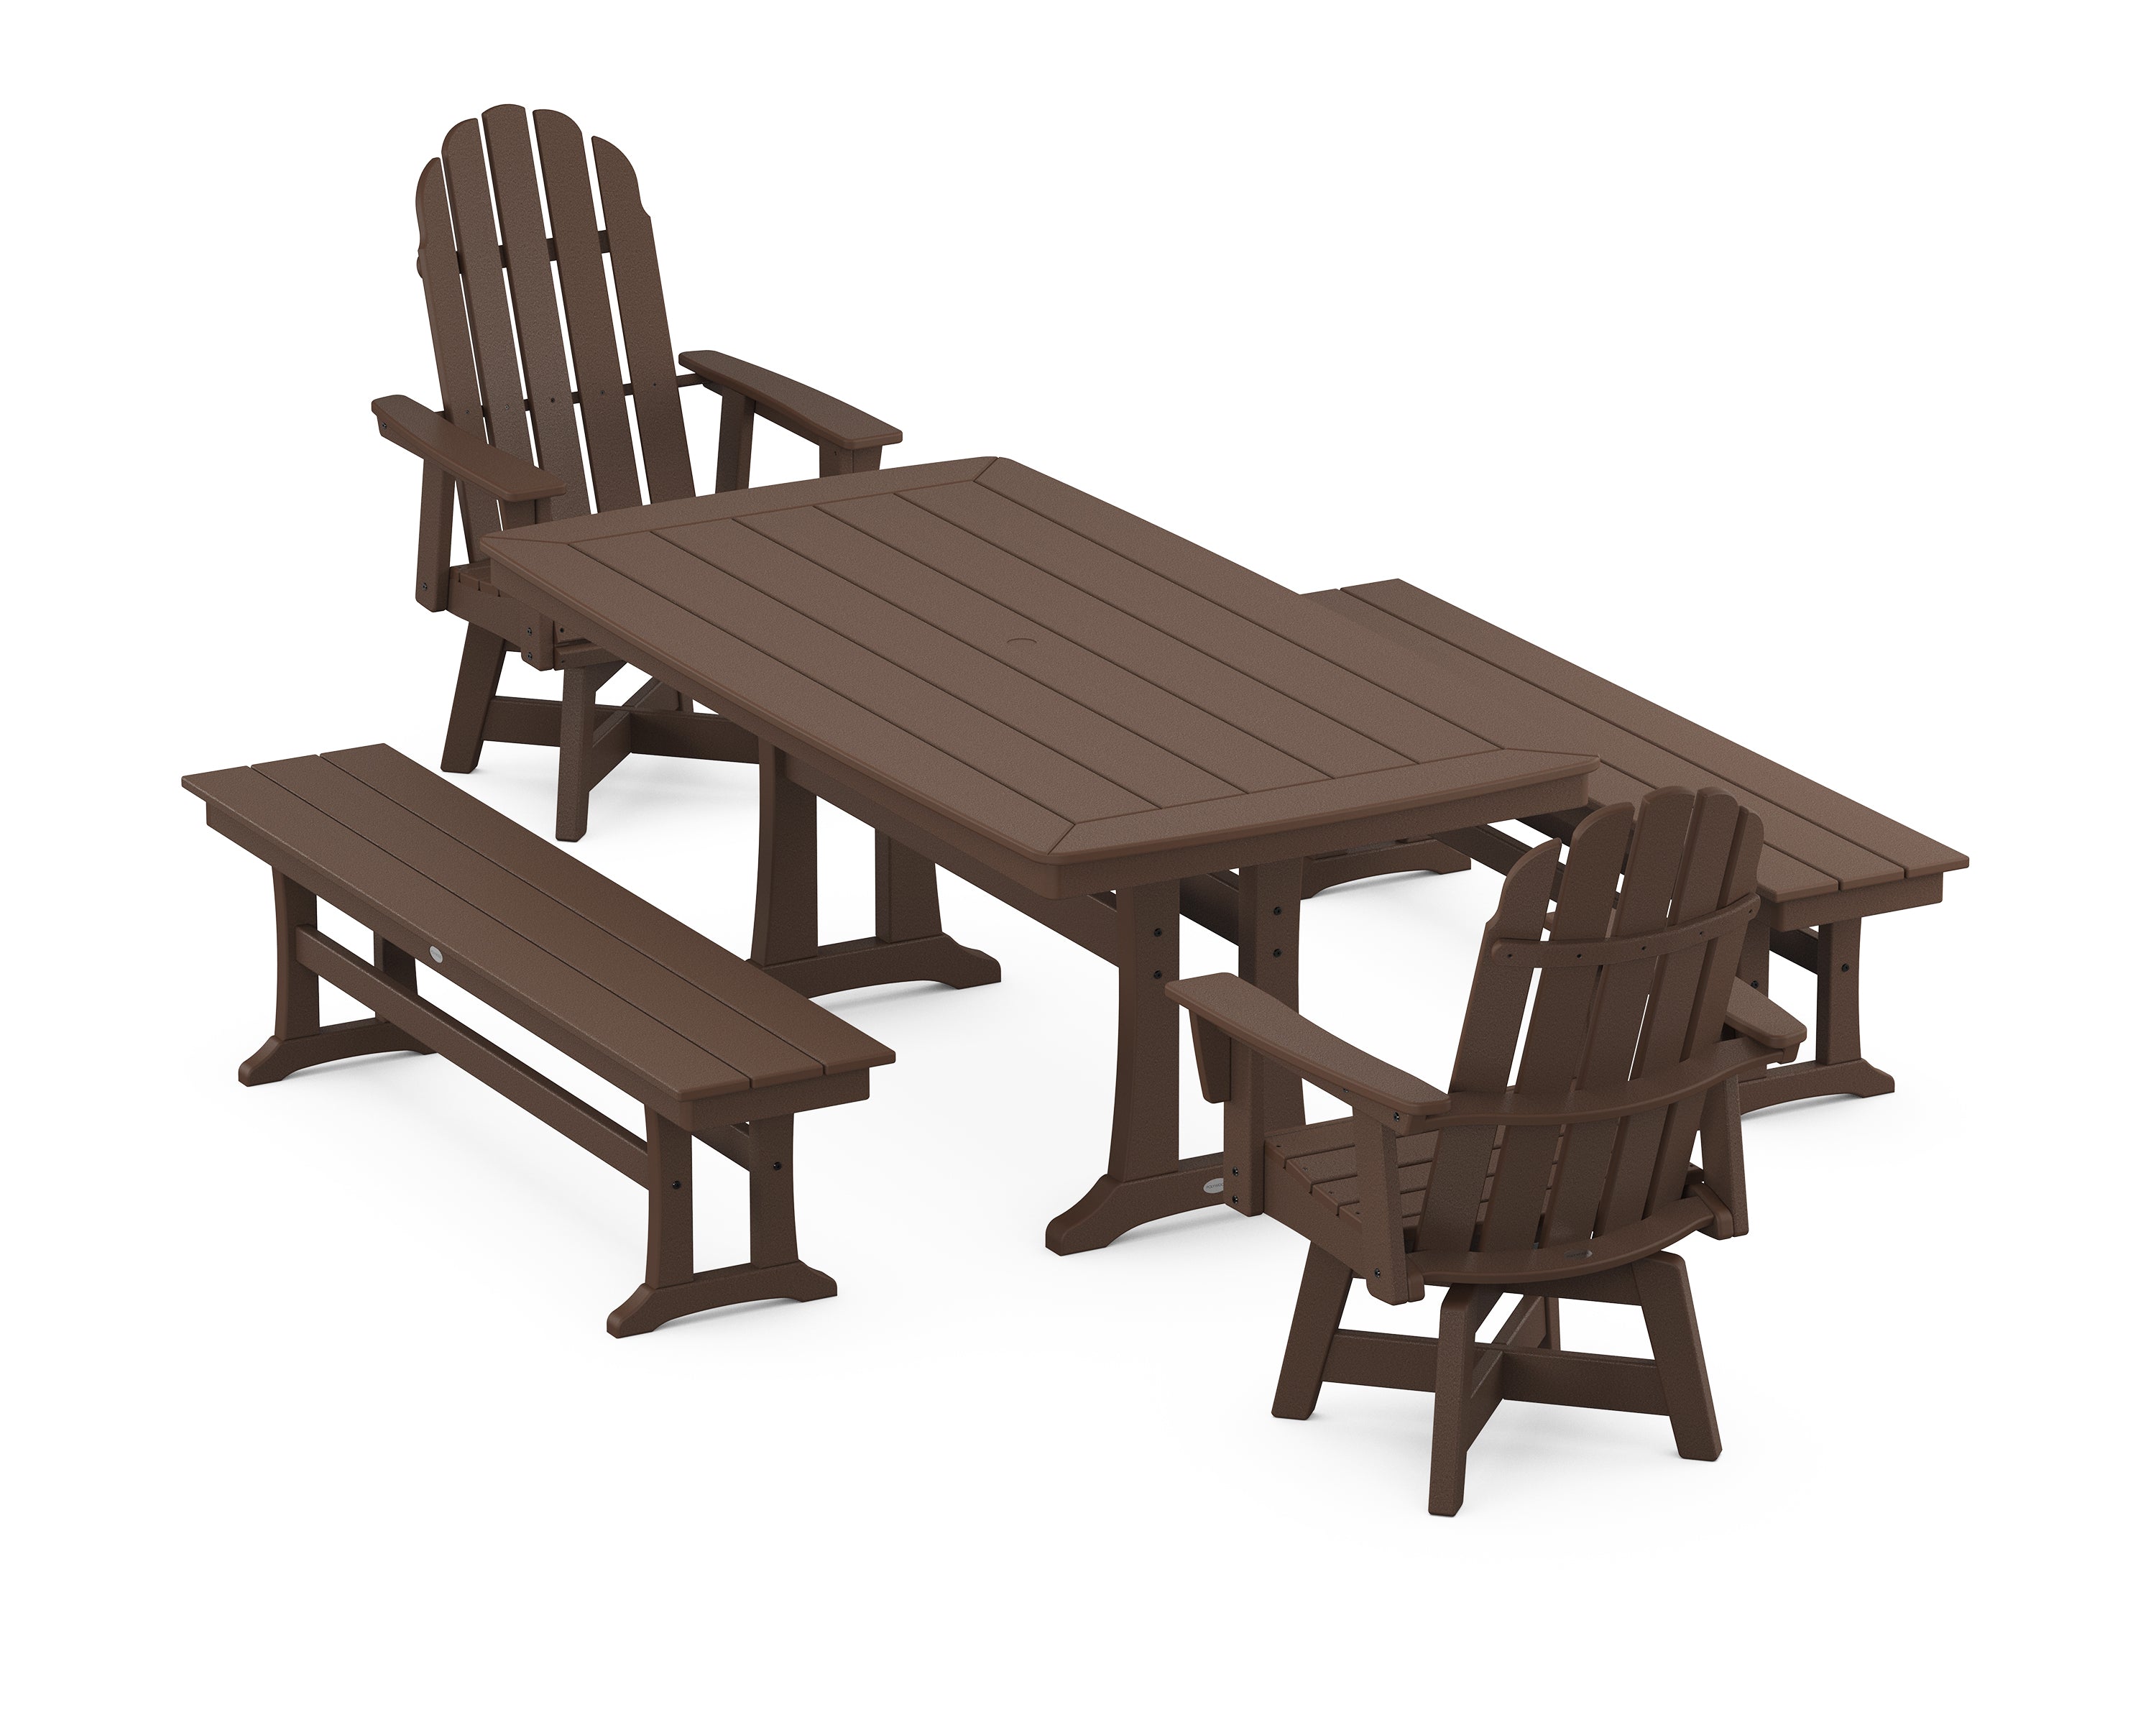 POLYWOOD® Vineyard Adirondack Swivel Chair 5-Piece Dining Set with Trestle Legs and Benches in Mahogany